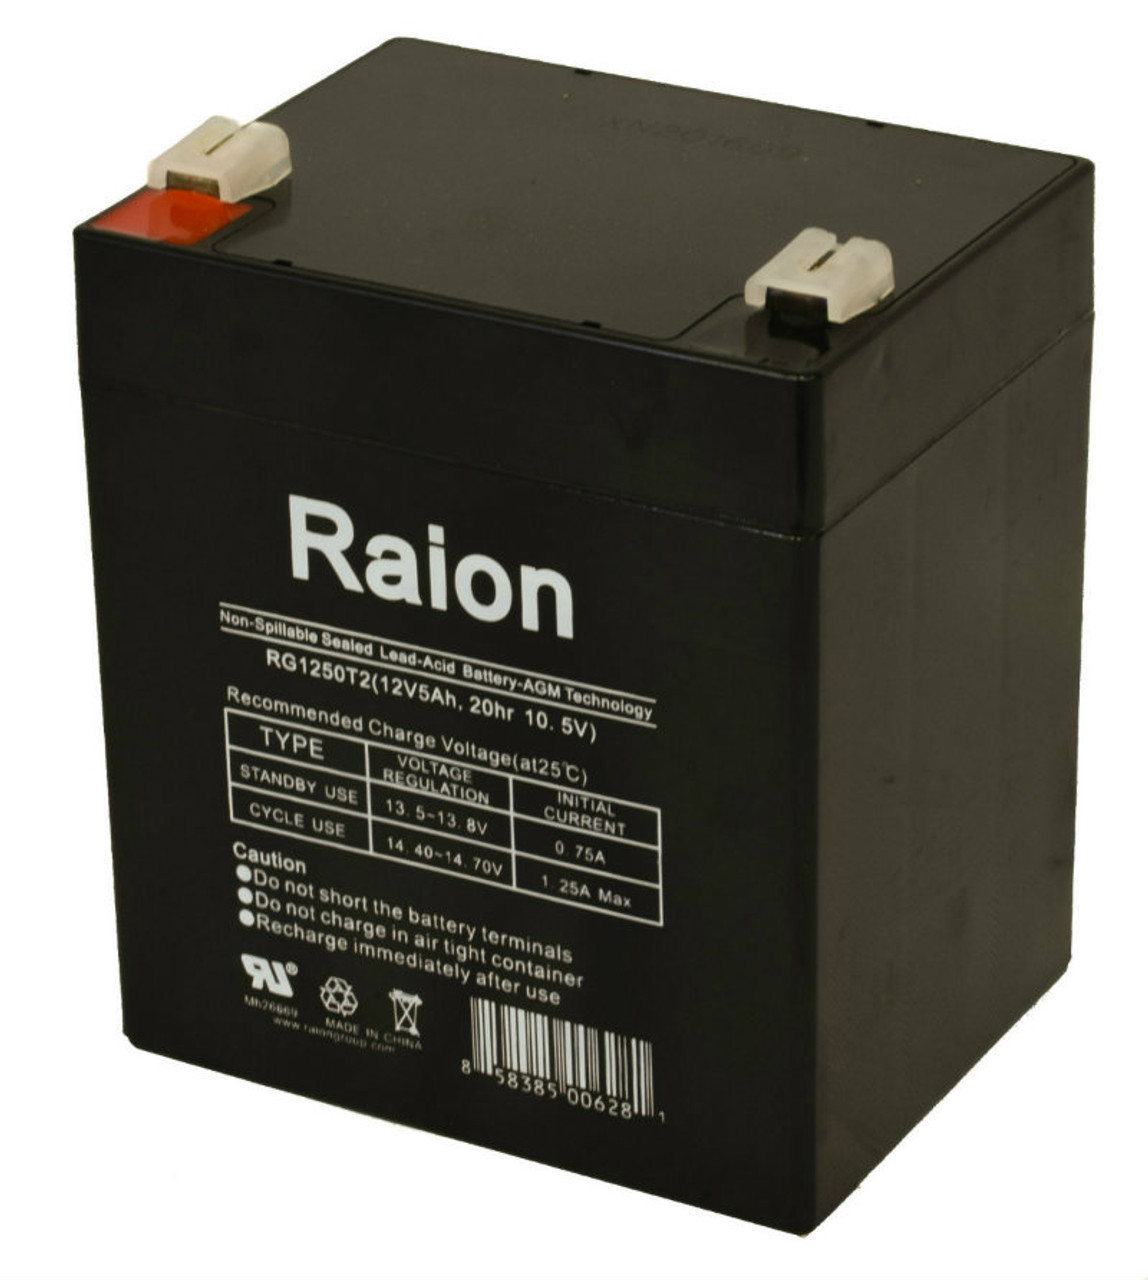 Raion Power RG1250T1 Replacement Battery for Ohio Medical Care-e-vac III Portable Suction